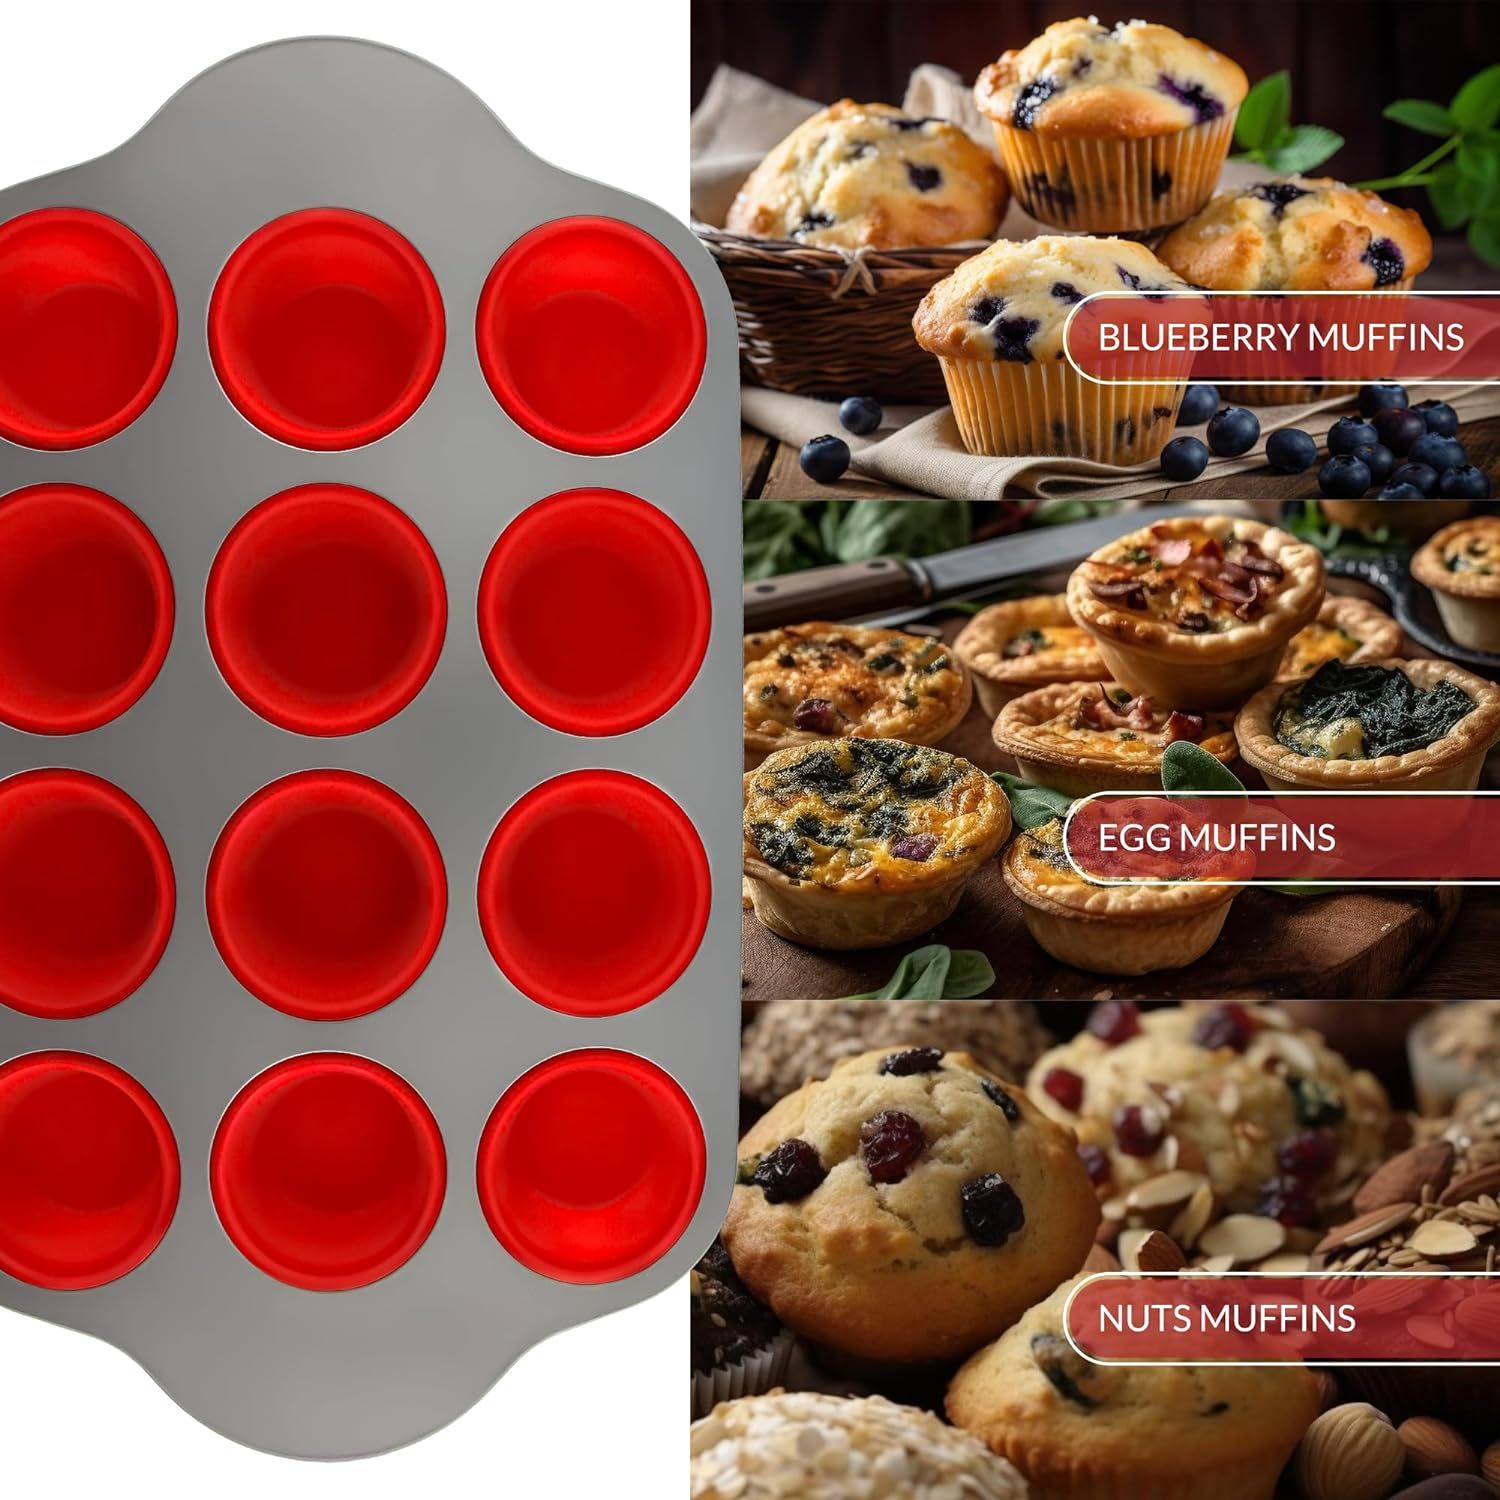 https://media.karousell.com/media/photos/products/2023/10/12/silicone_muffin_pan_with_steel_1697091629_9f8d47bf_progressive